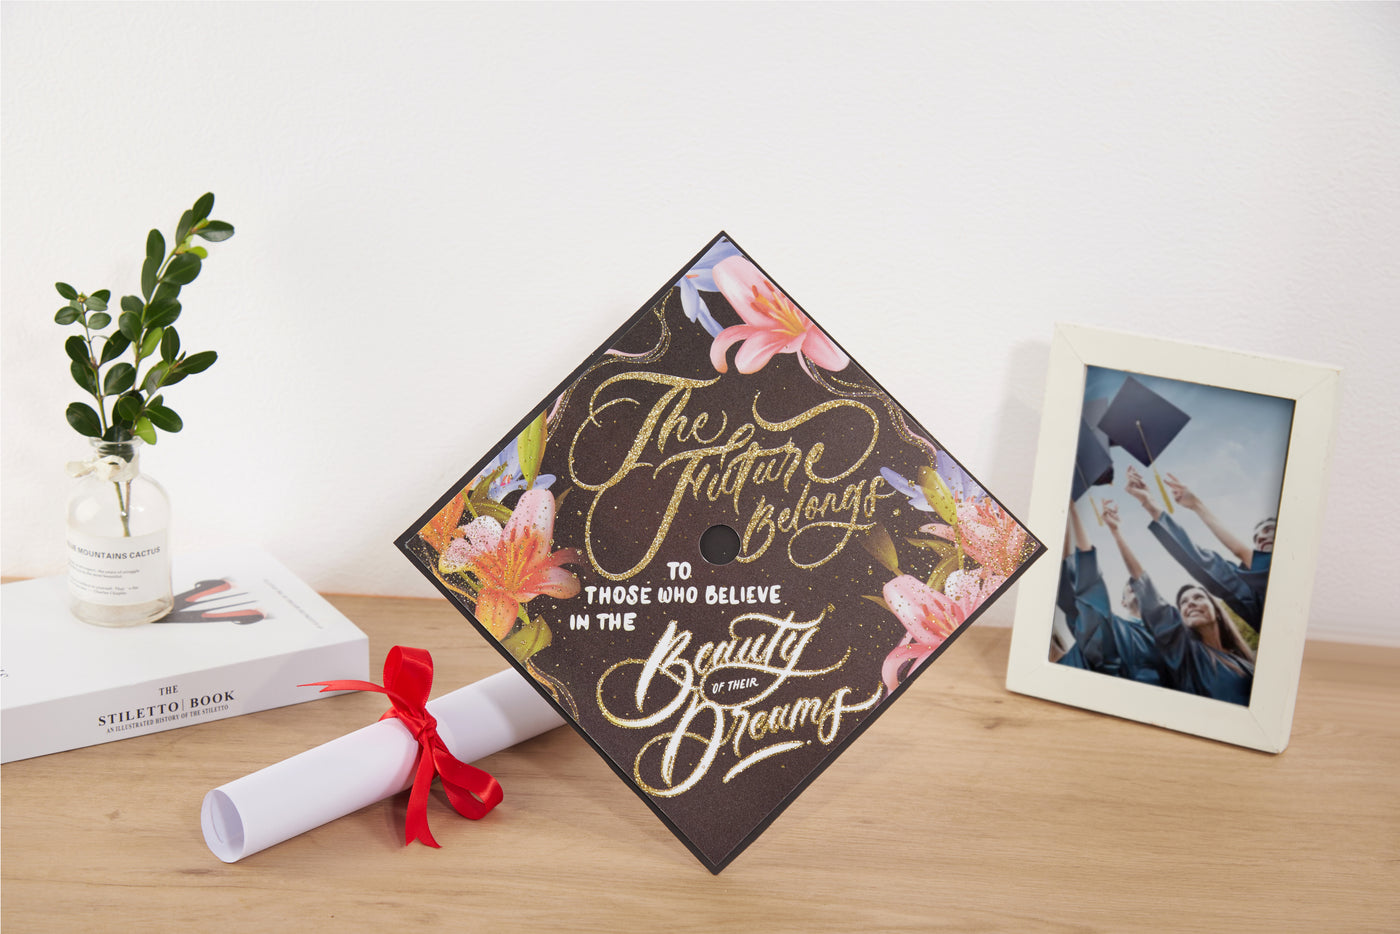 Graduation cap topper art print, The future belongs to those who believe in the beautify of their dreams